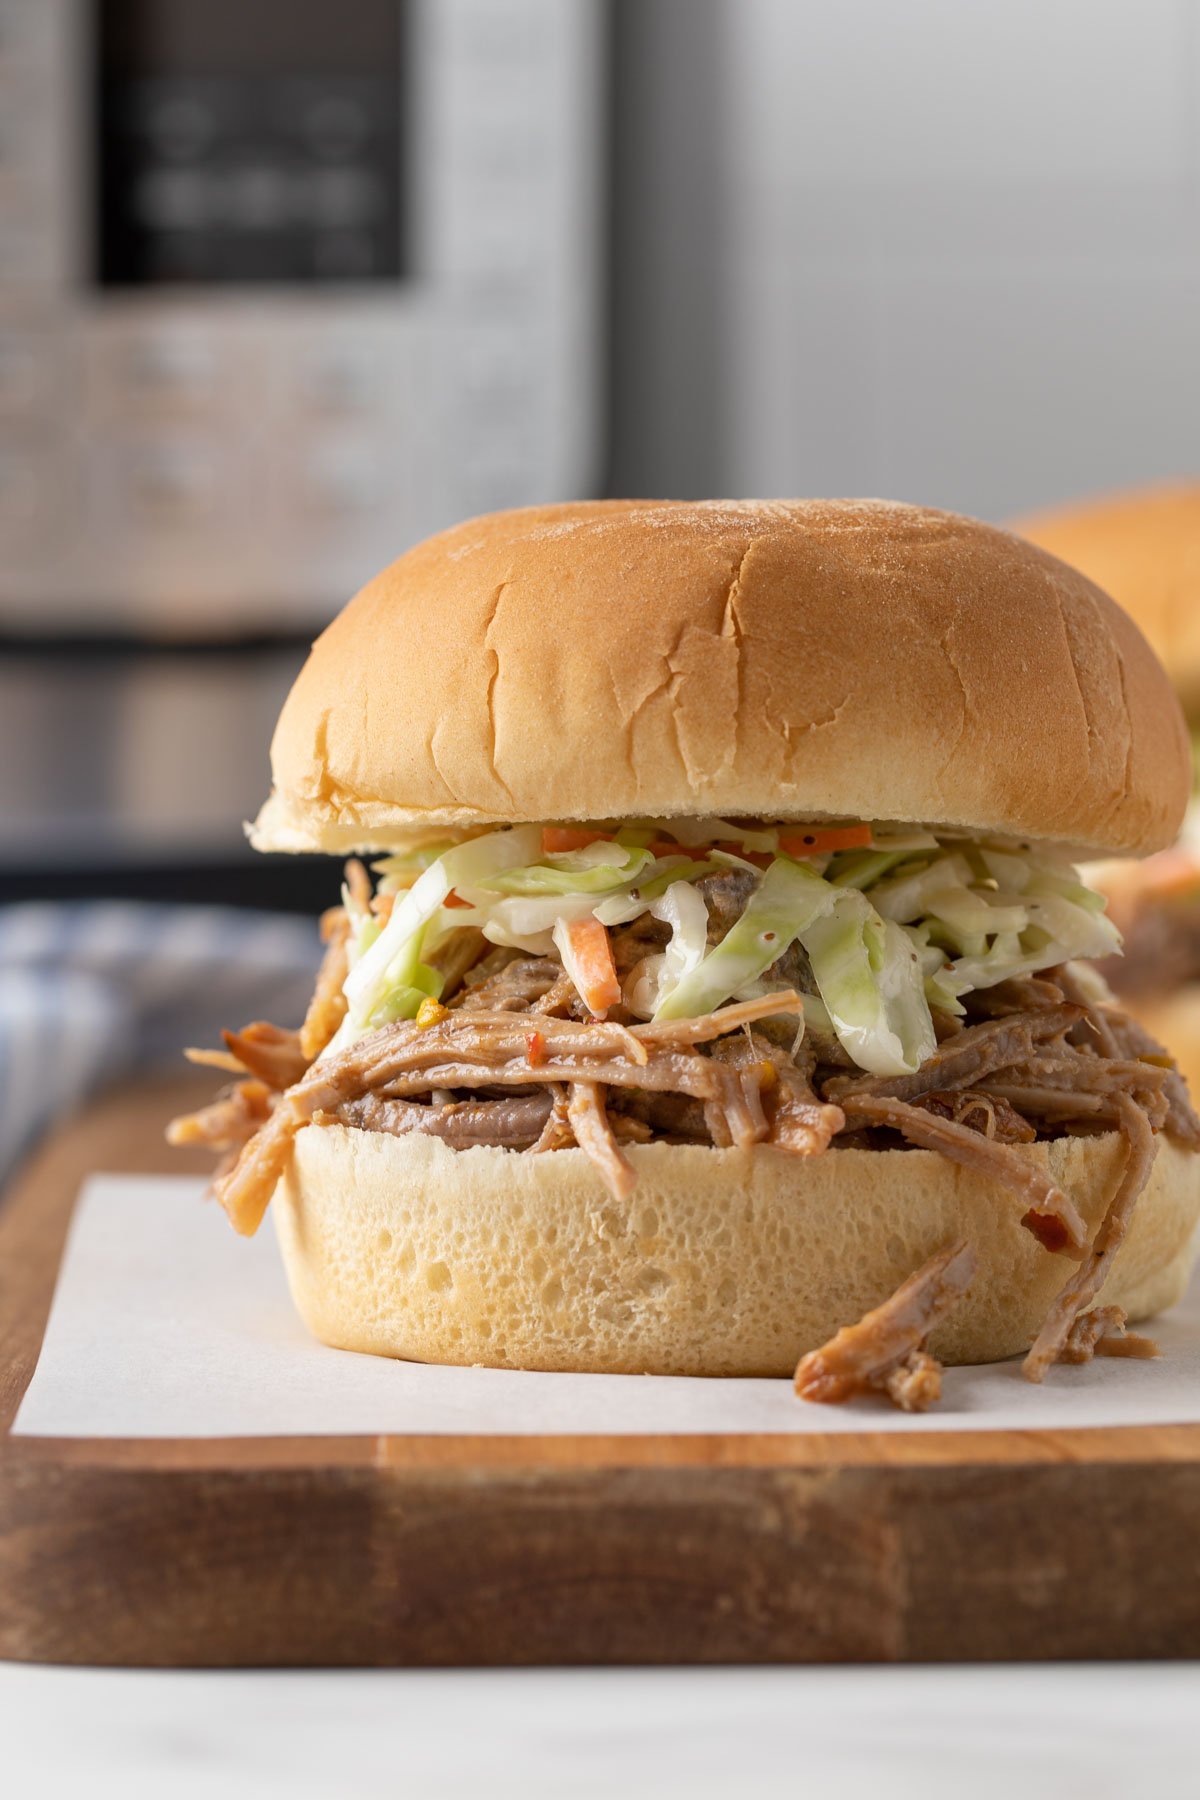 Closeup view of a pulled pork sandwich with an Instant Pot in the background.